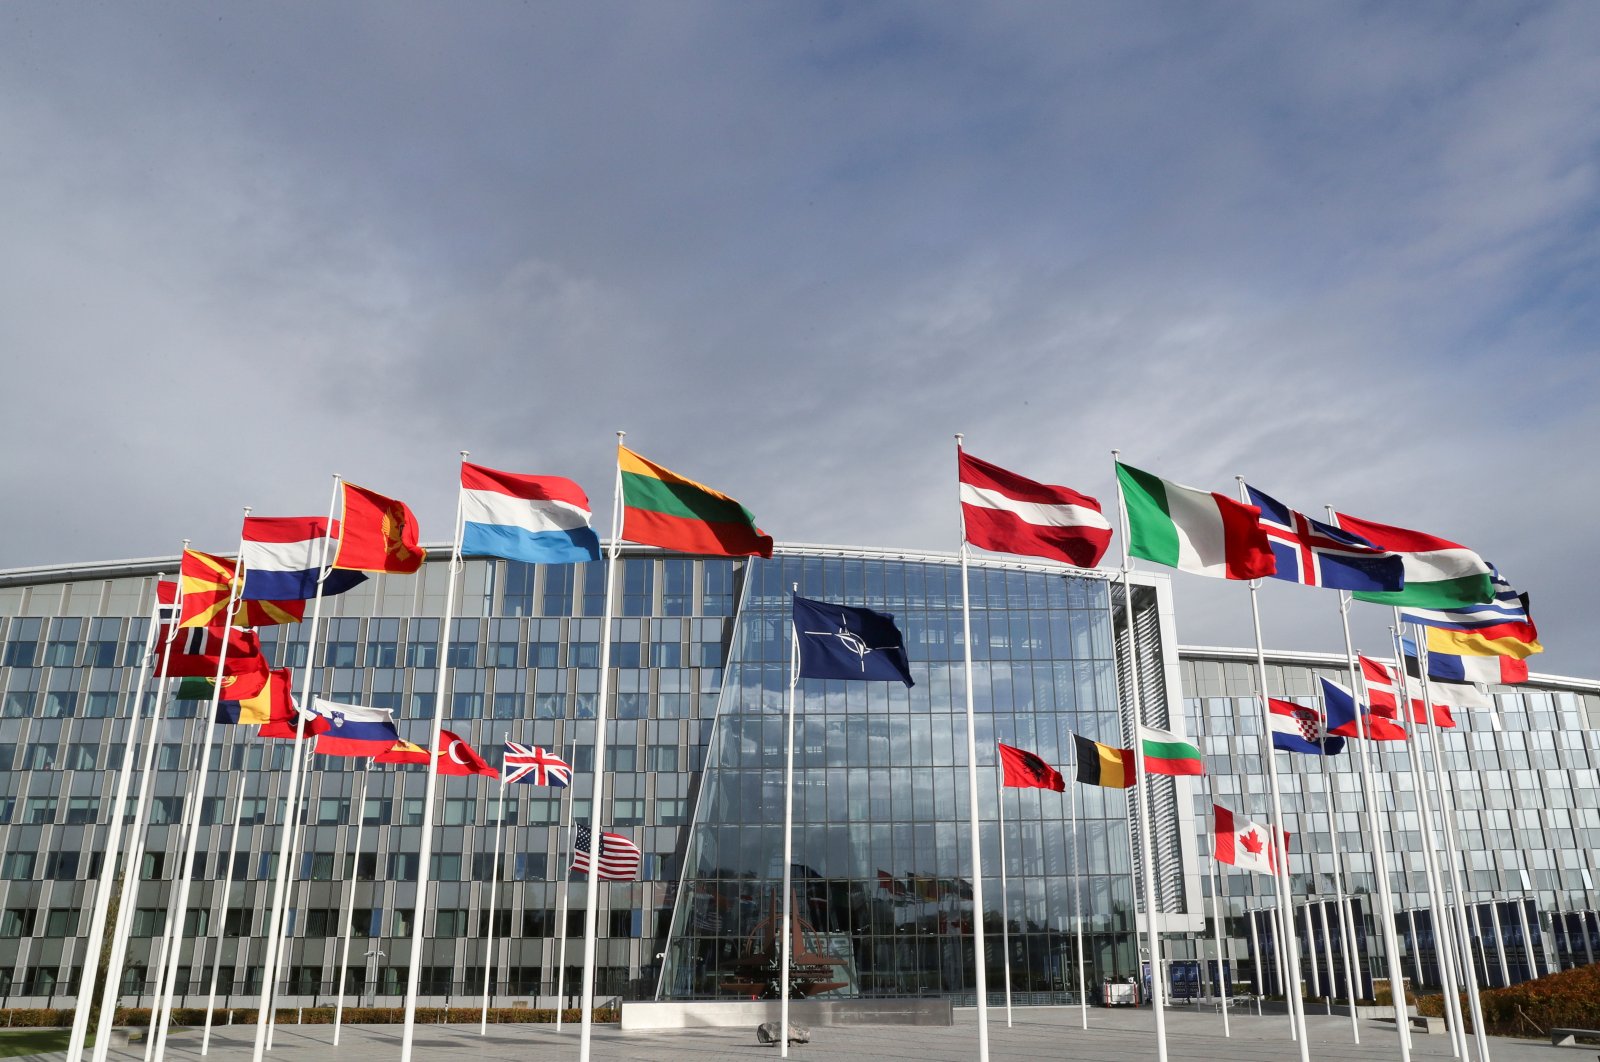 Flags wave outside the NATO headquarters ahead of a NATO defense ministers meeting, in Brussels, Belgium, Oct. 21, 2021. (Reuters Photo)